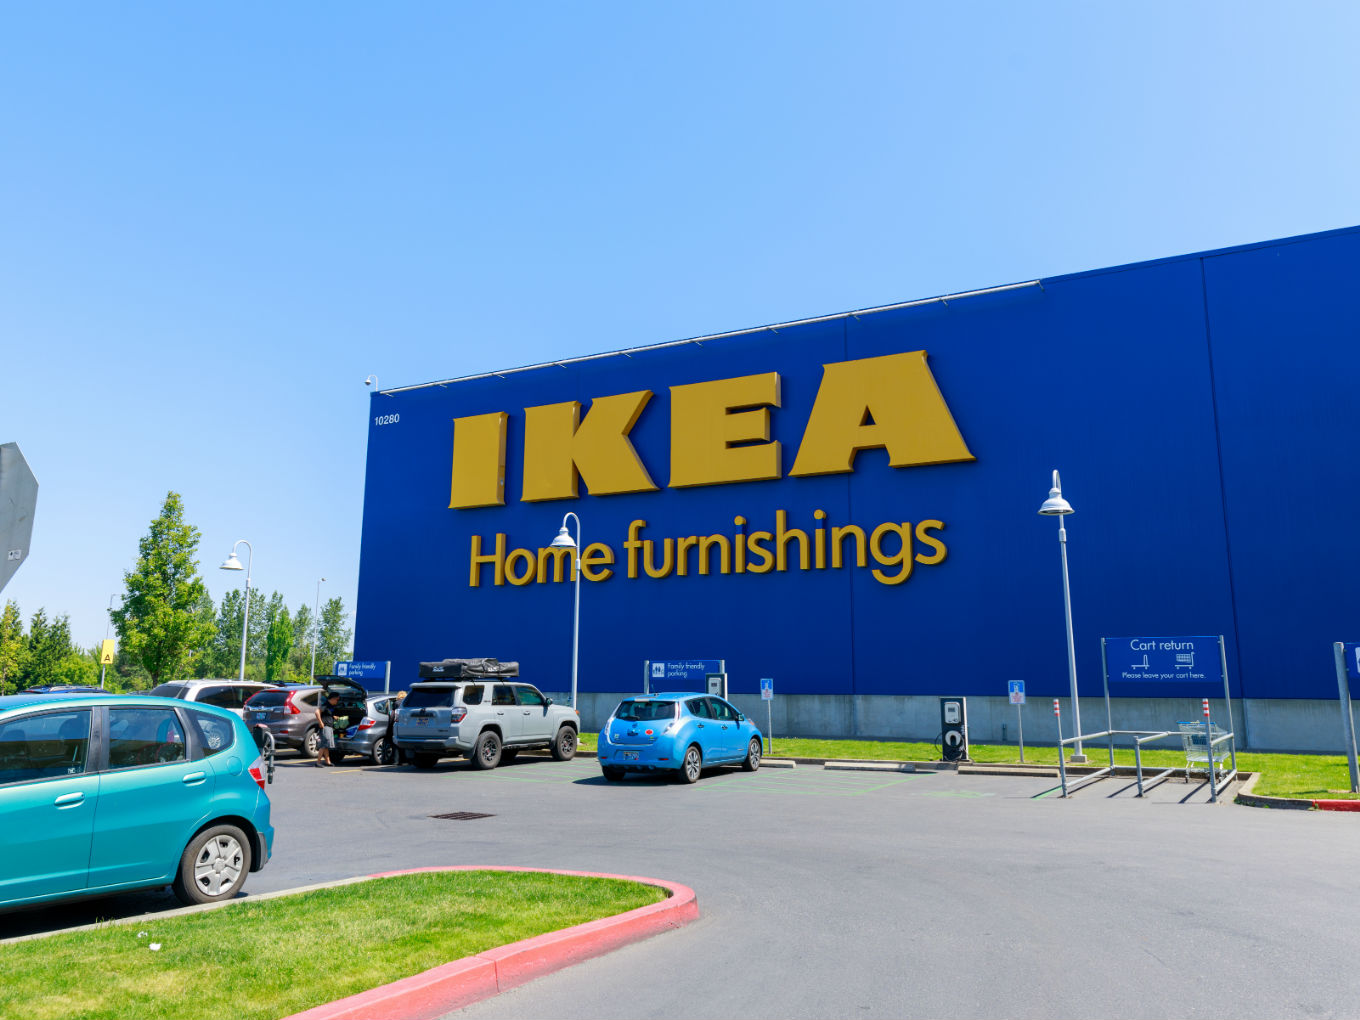 Image result for IKEA gearing up to launch in <a class='inner-topic-link' href='/search/topic?searchType=search&searchTerm=MUMBAI' target='_blank' title='click here to read more about MUMBAI'>mumbai</a>, <a class='inner-topic-link' href='/search/topic?searchType=search&searchTerm=DELHI' target='_blank' title='click here to read more about DELHI'>delhi</a> & Bengaluru soon